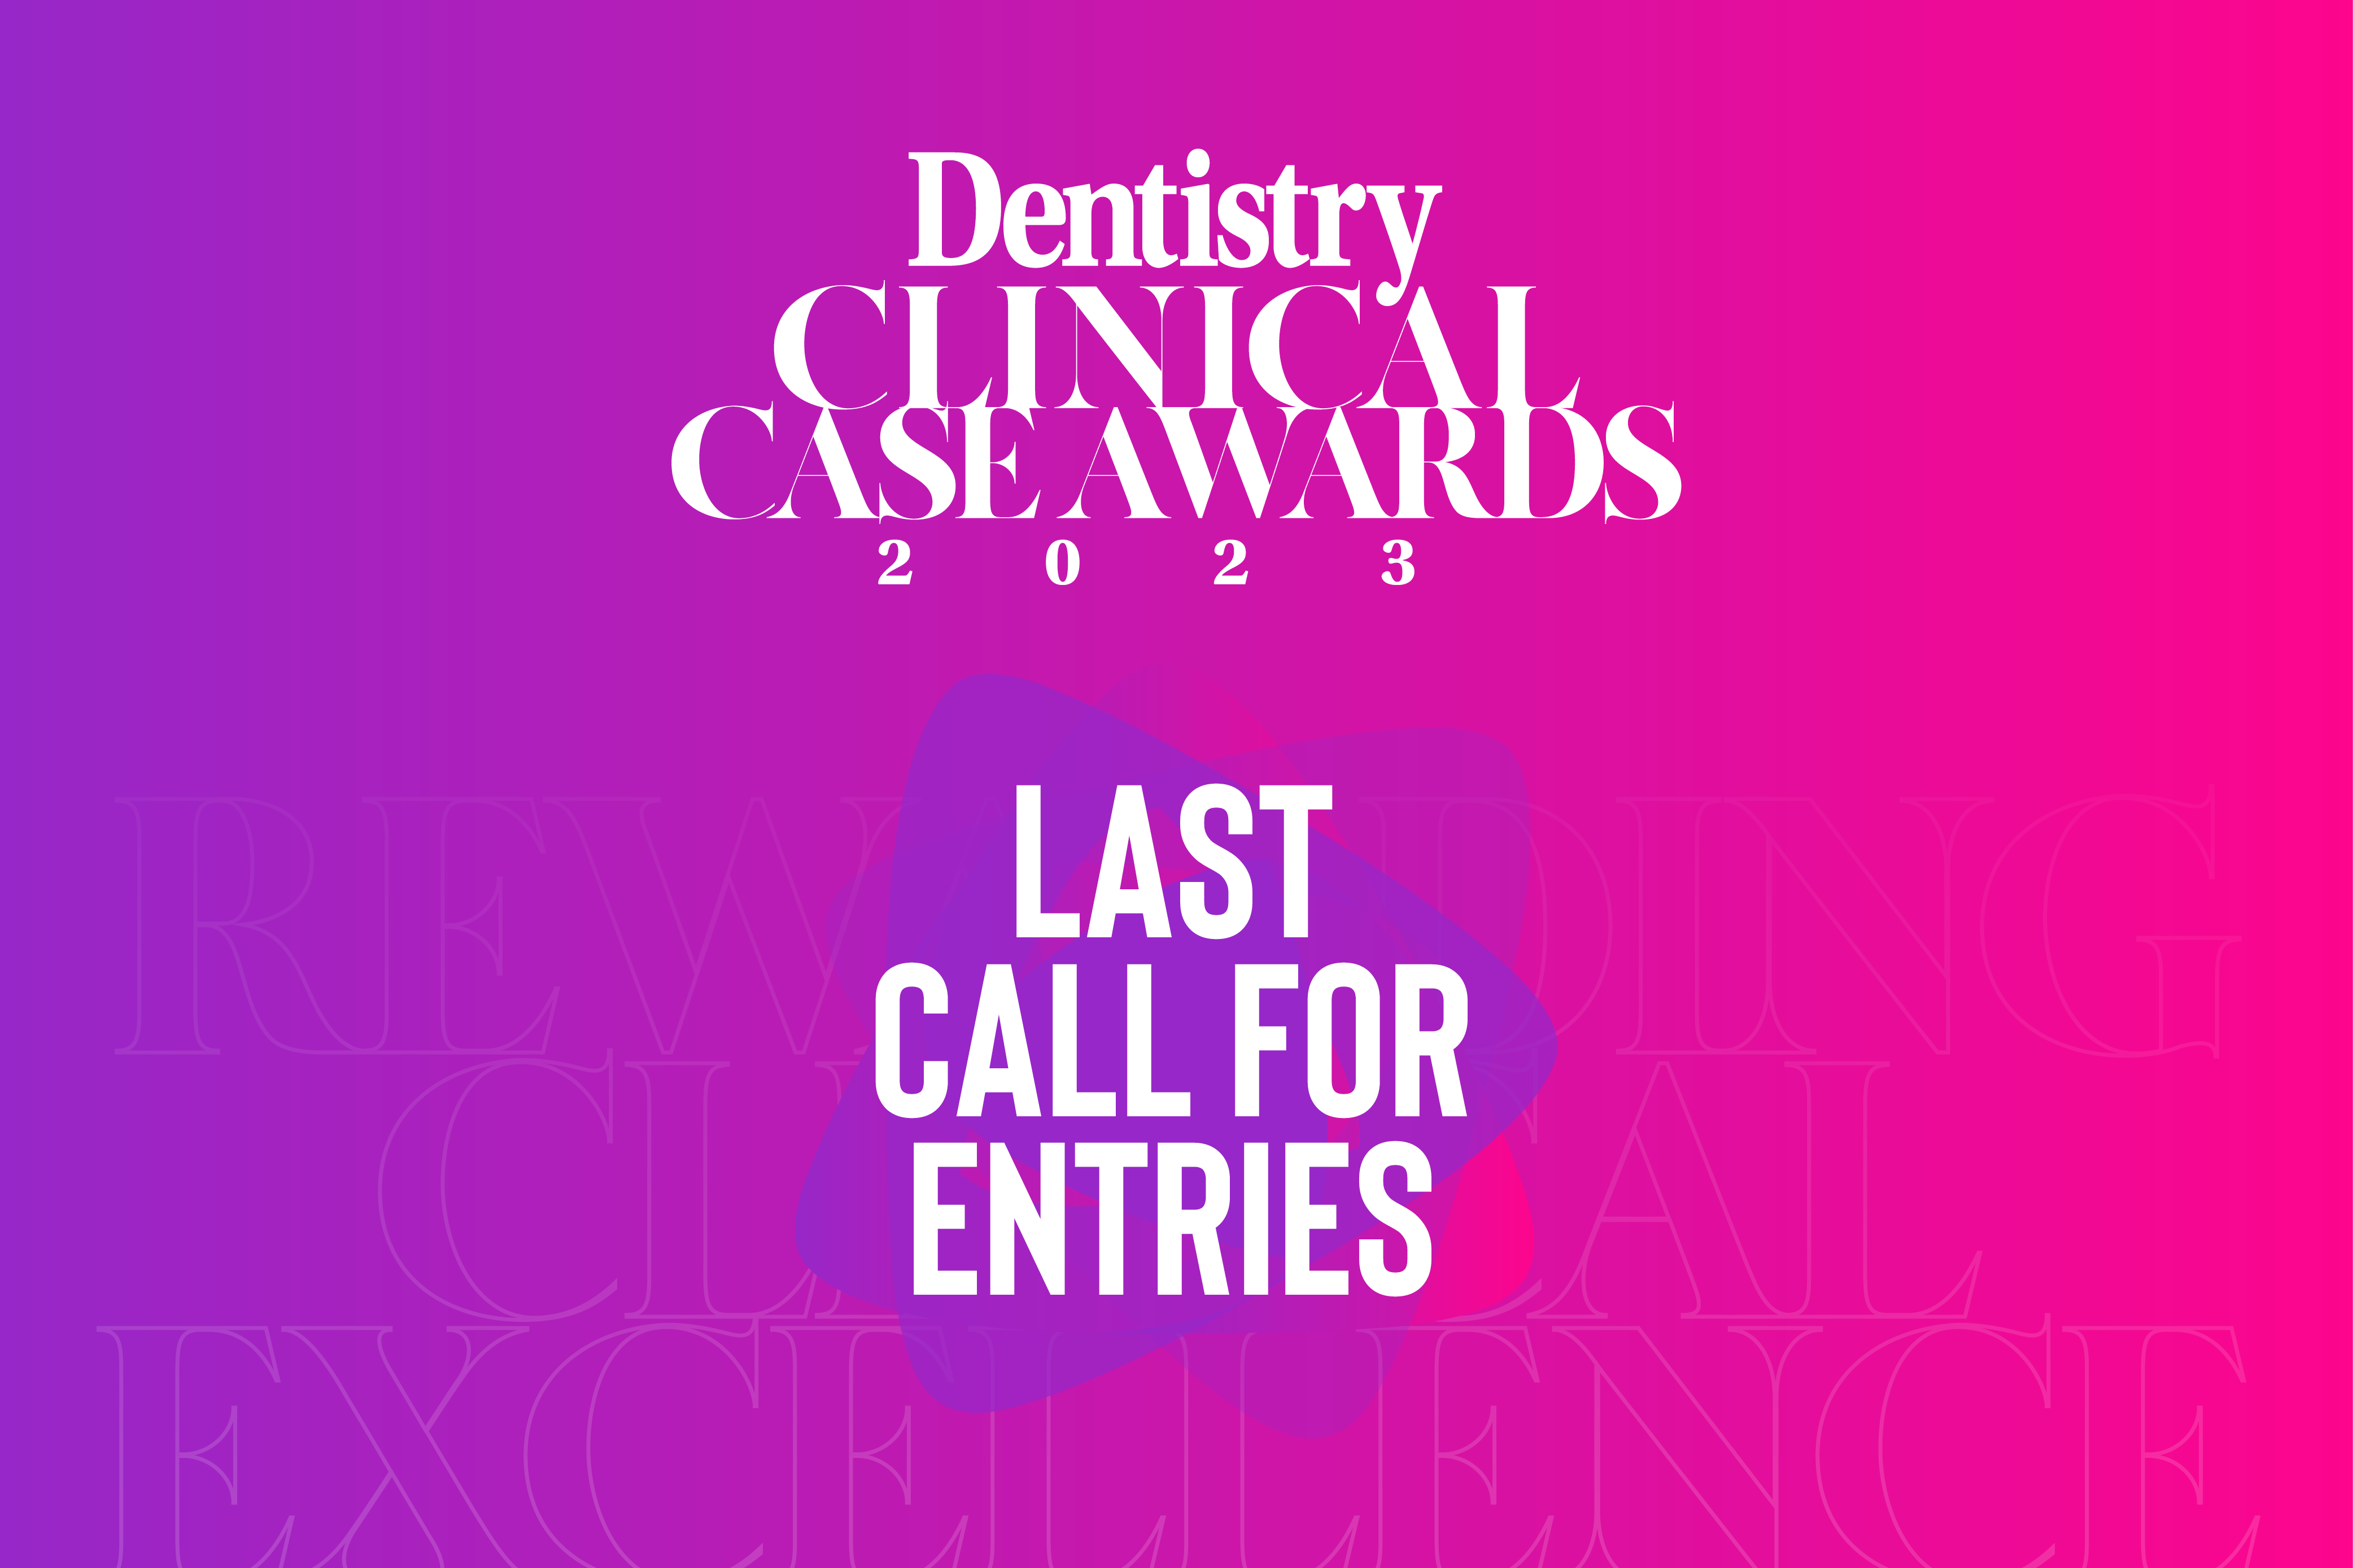 Wednesday 24 May is the entry deadline for this year’s Dentistry Clinical Case Awards – find out how to enter here.